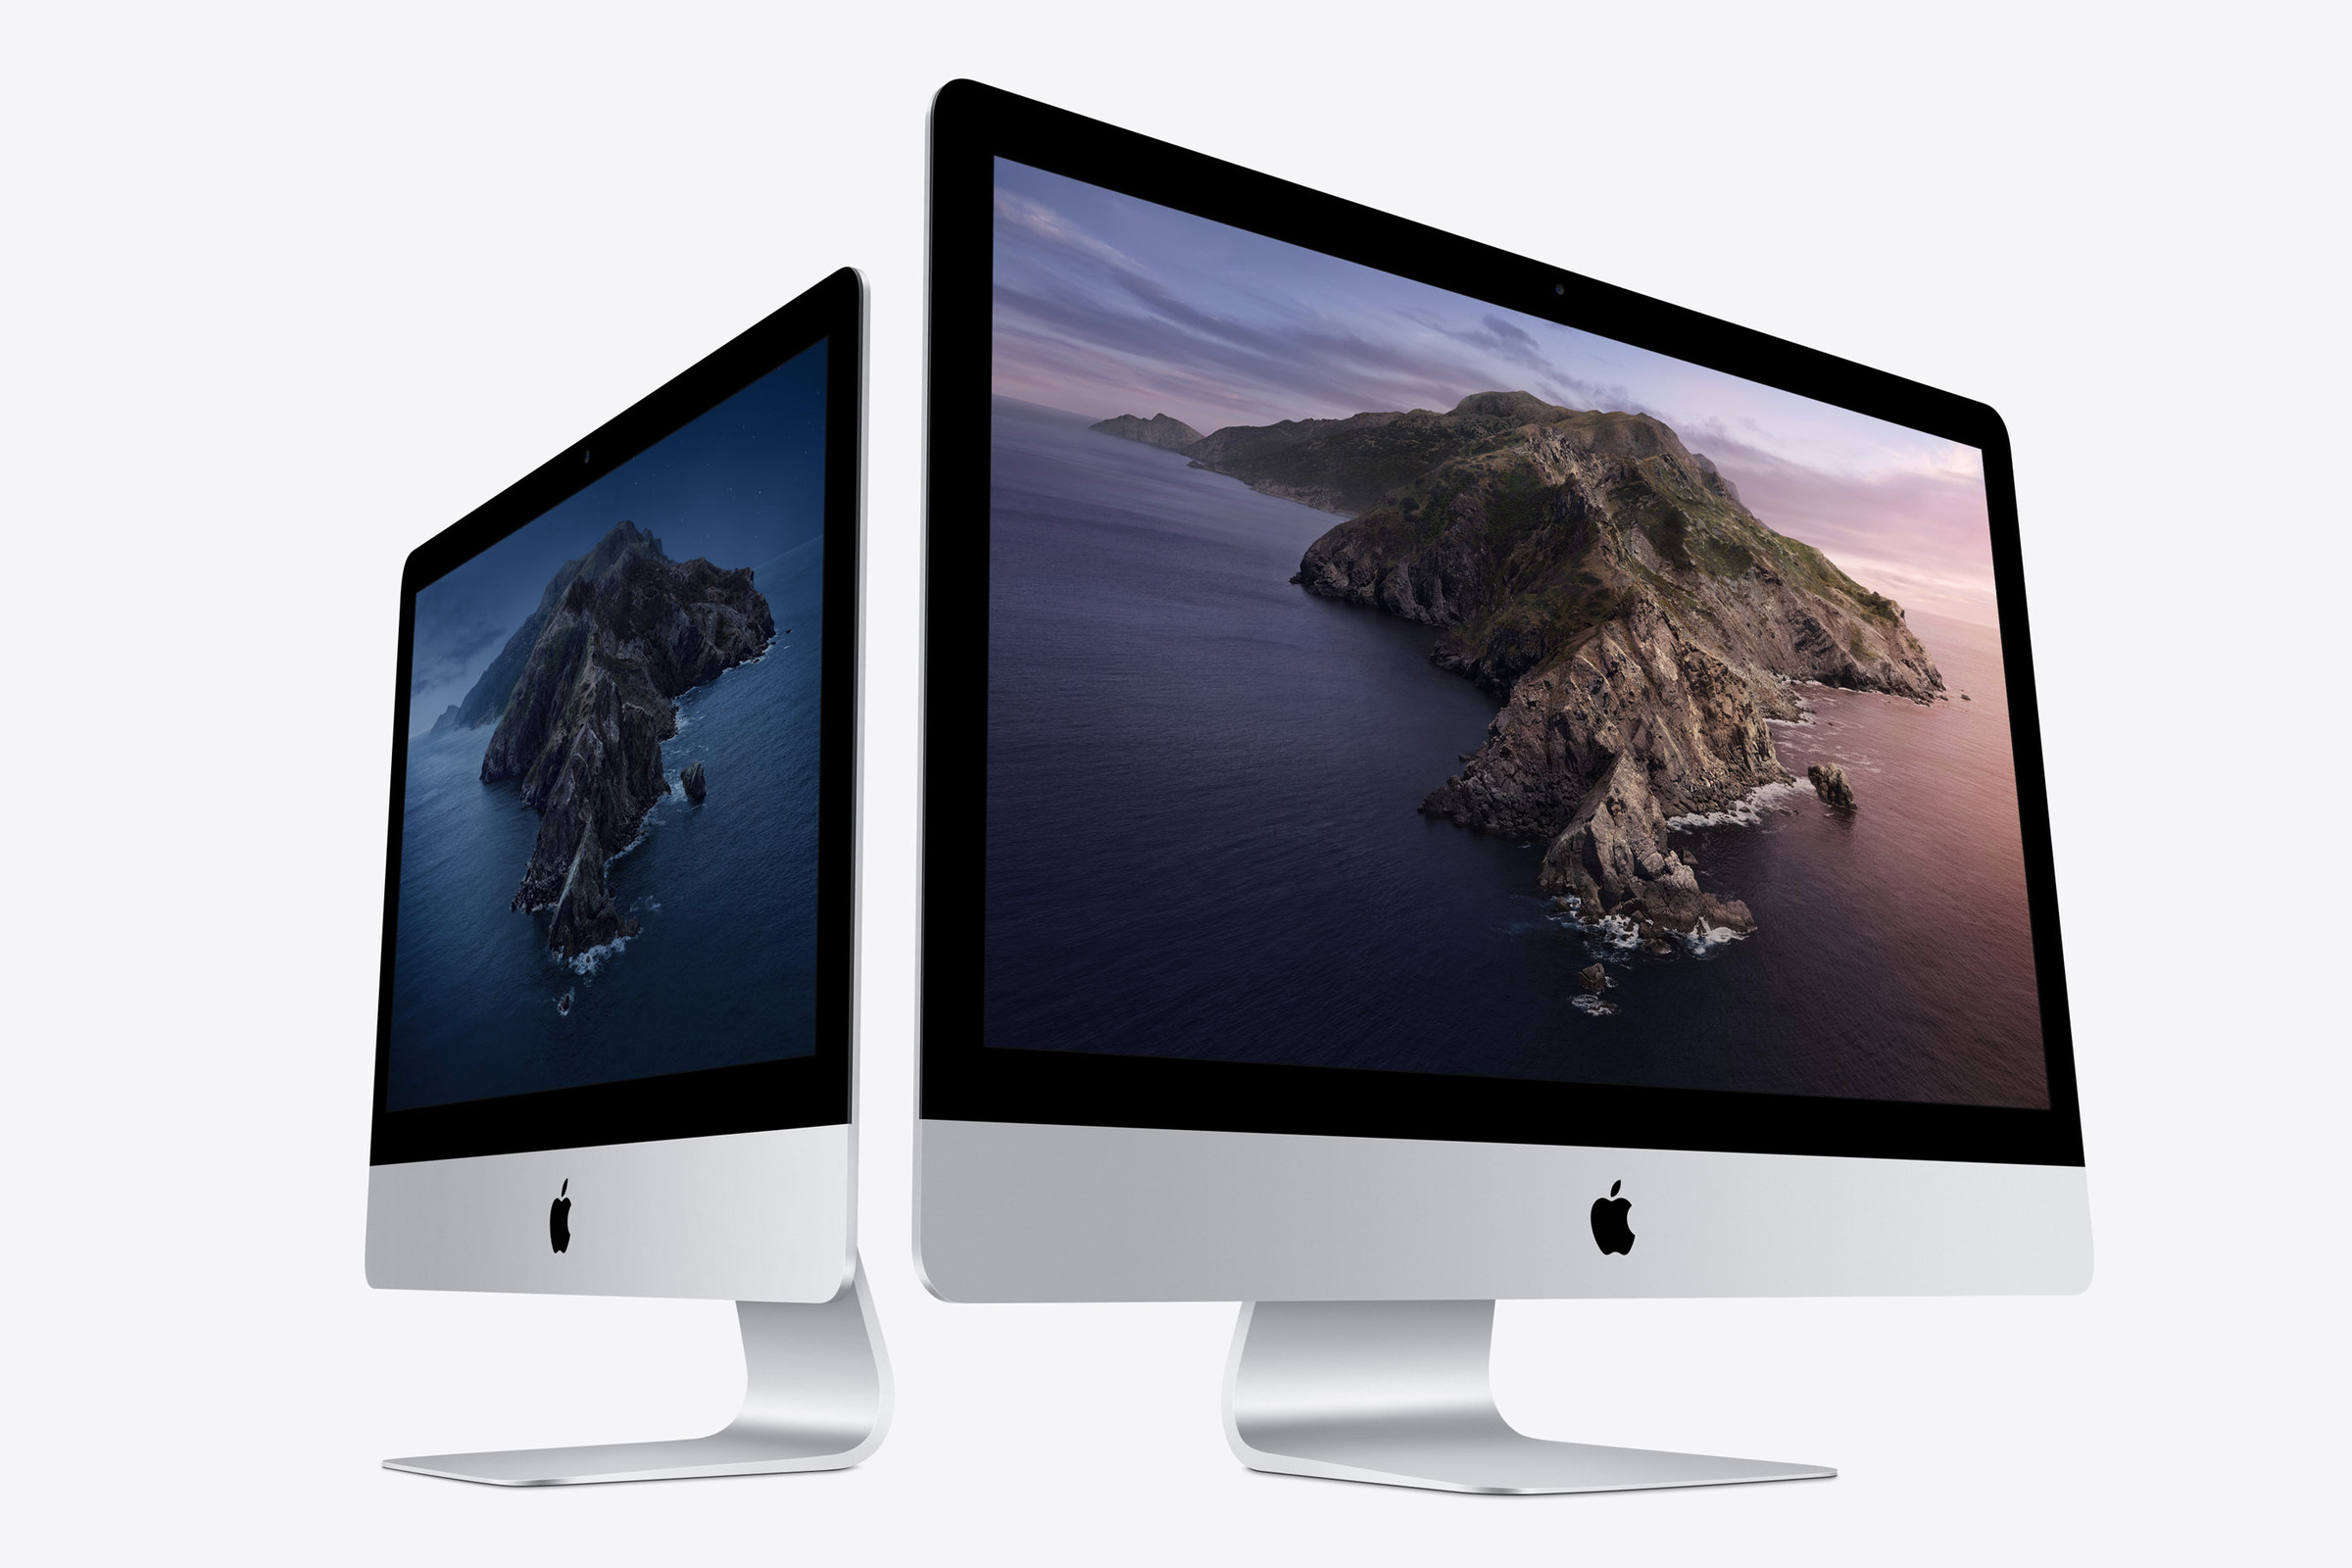 The 21.5 and 27 inch iMacs